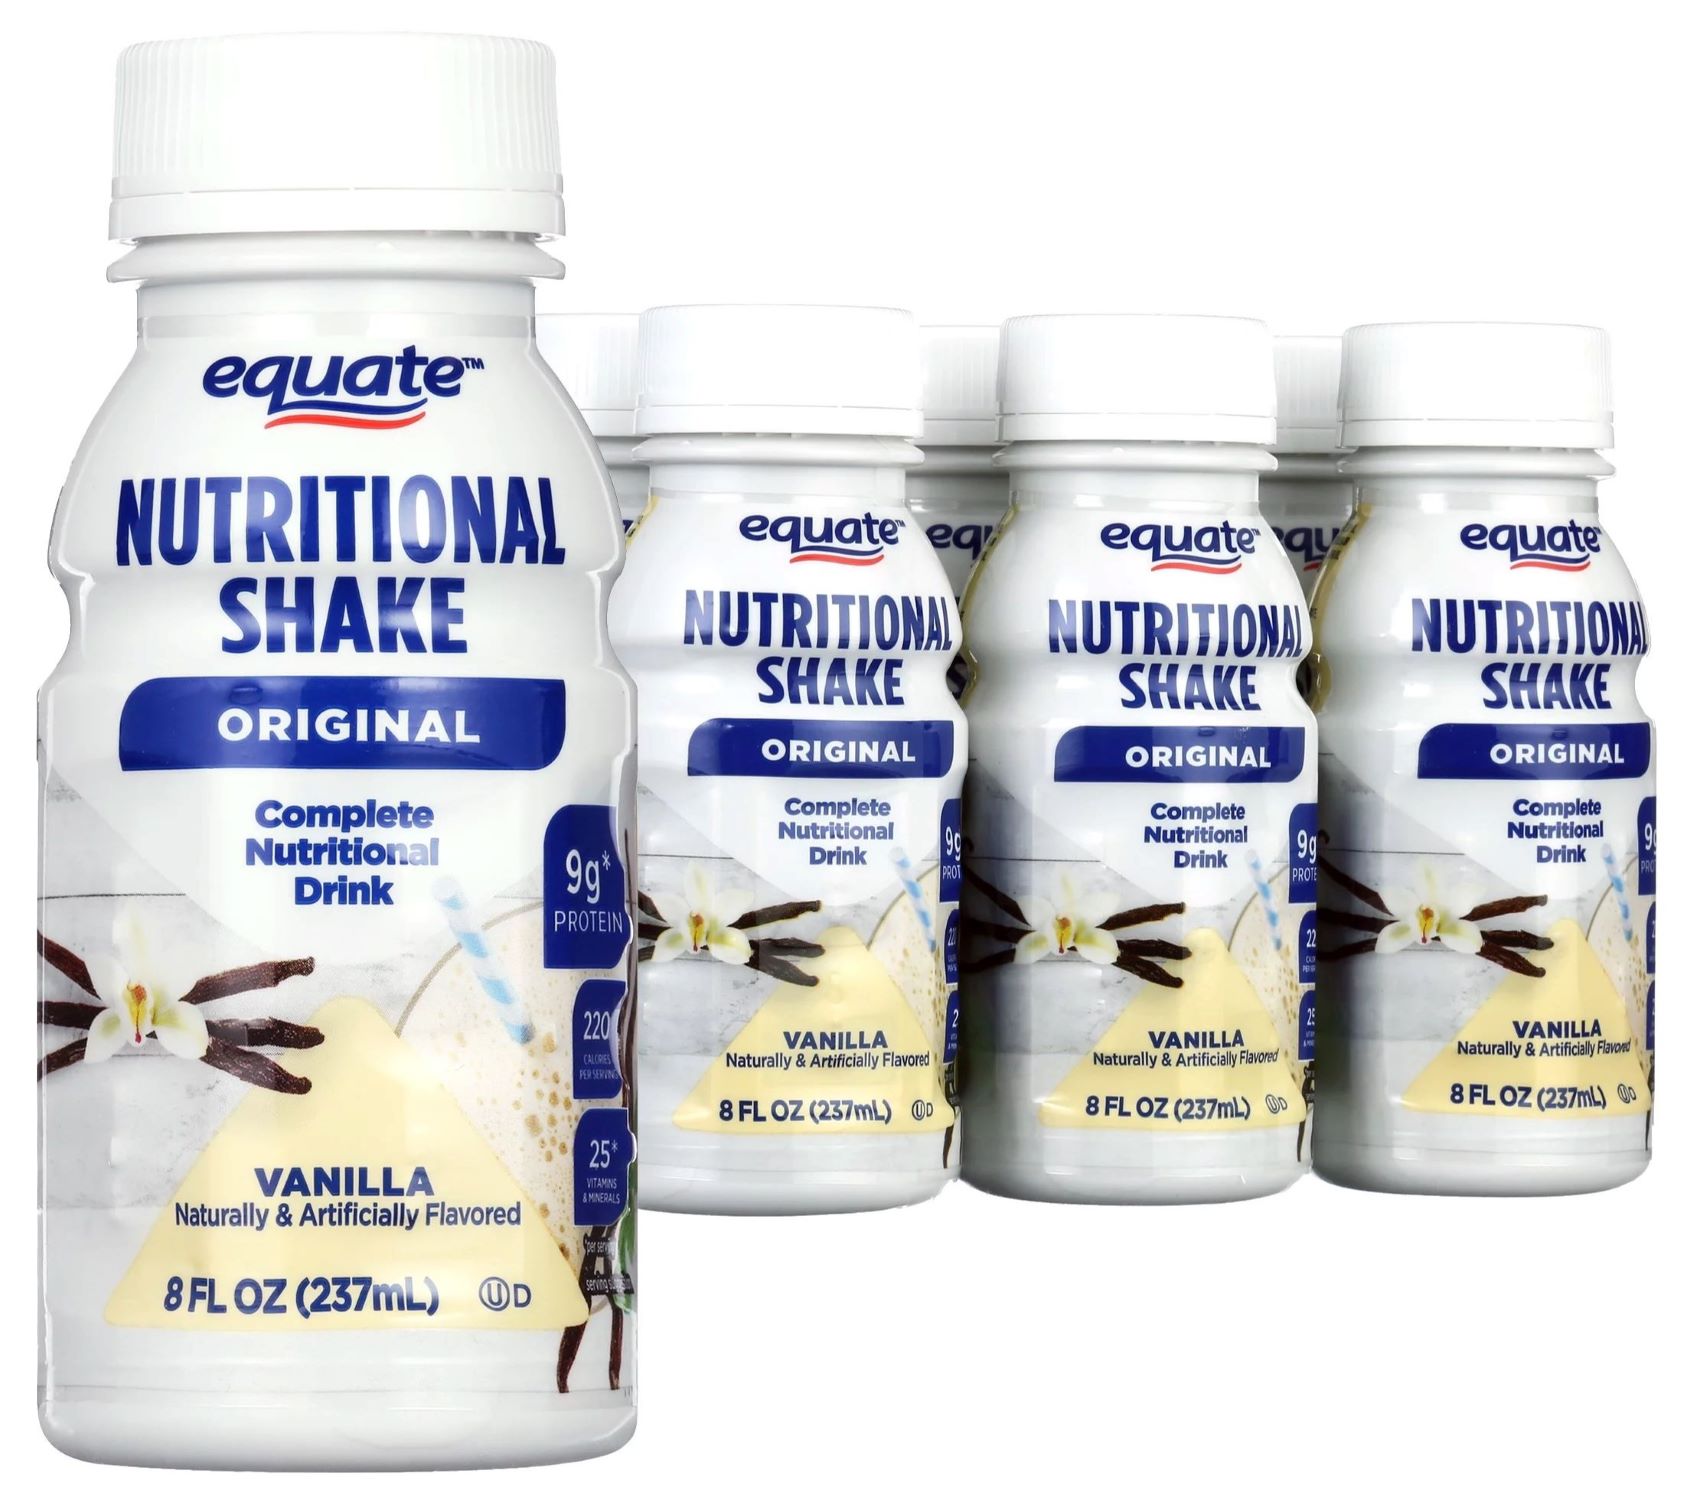 10-equate-nutritional-shake-nutrition-facts